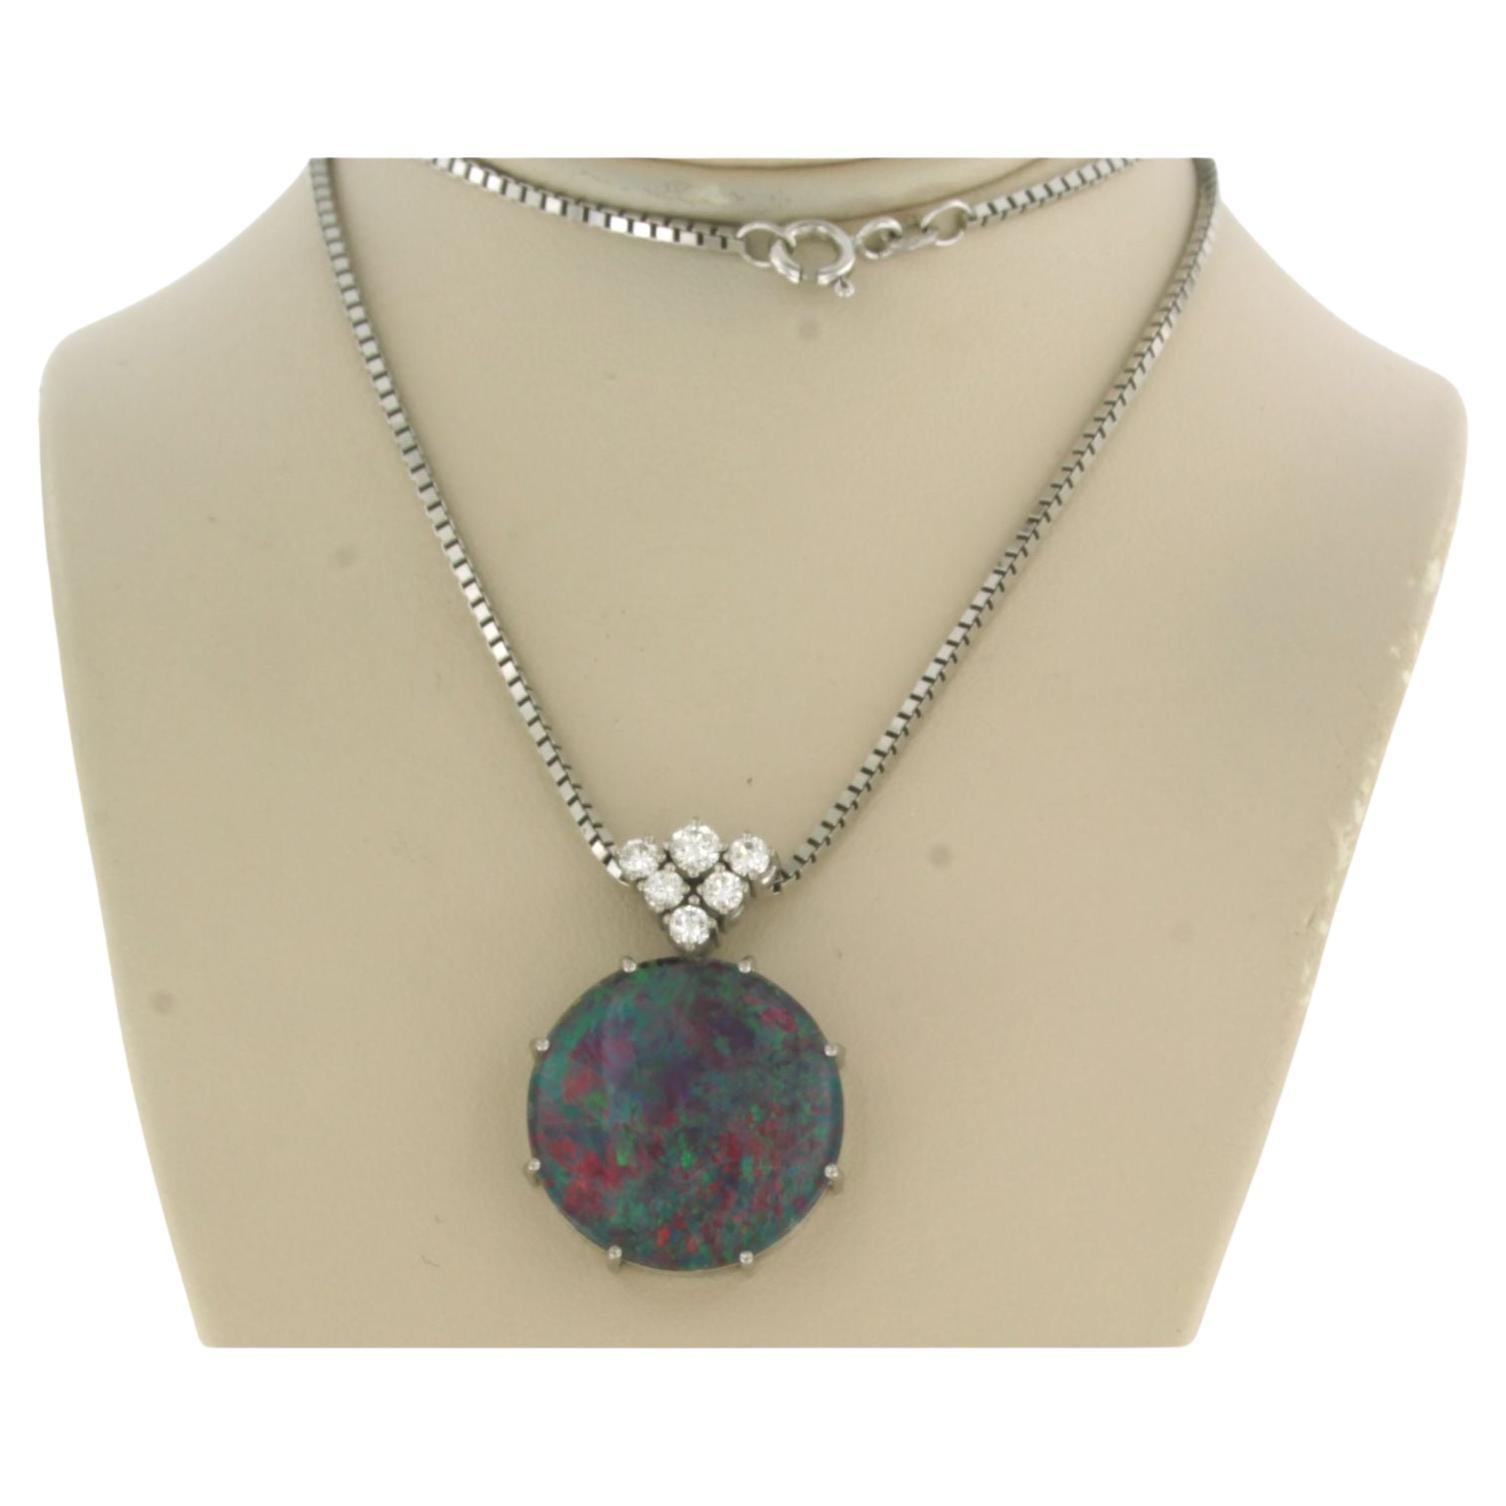 Necklace with pendant set with opal and diamond 14k white gold